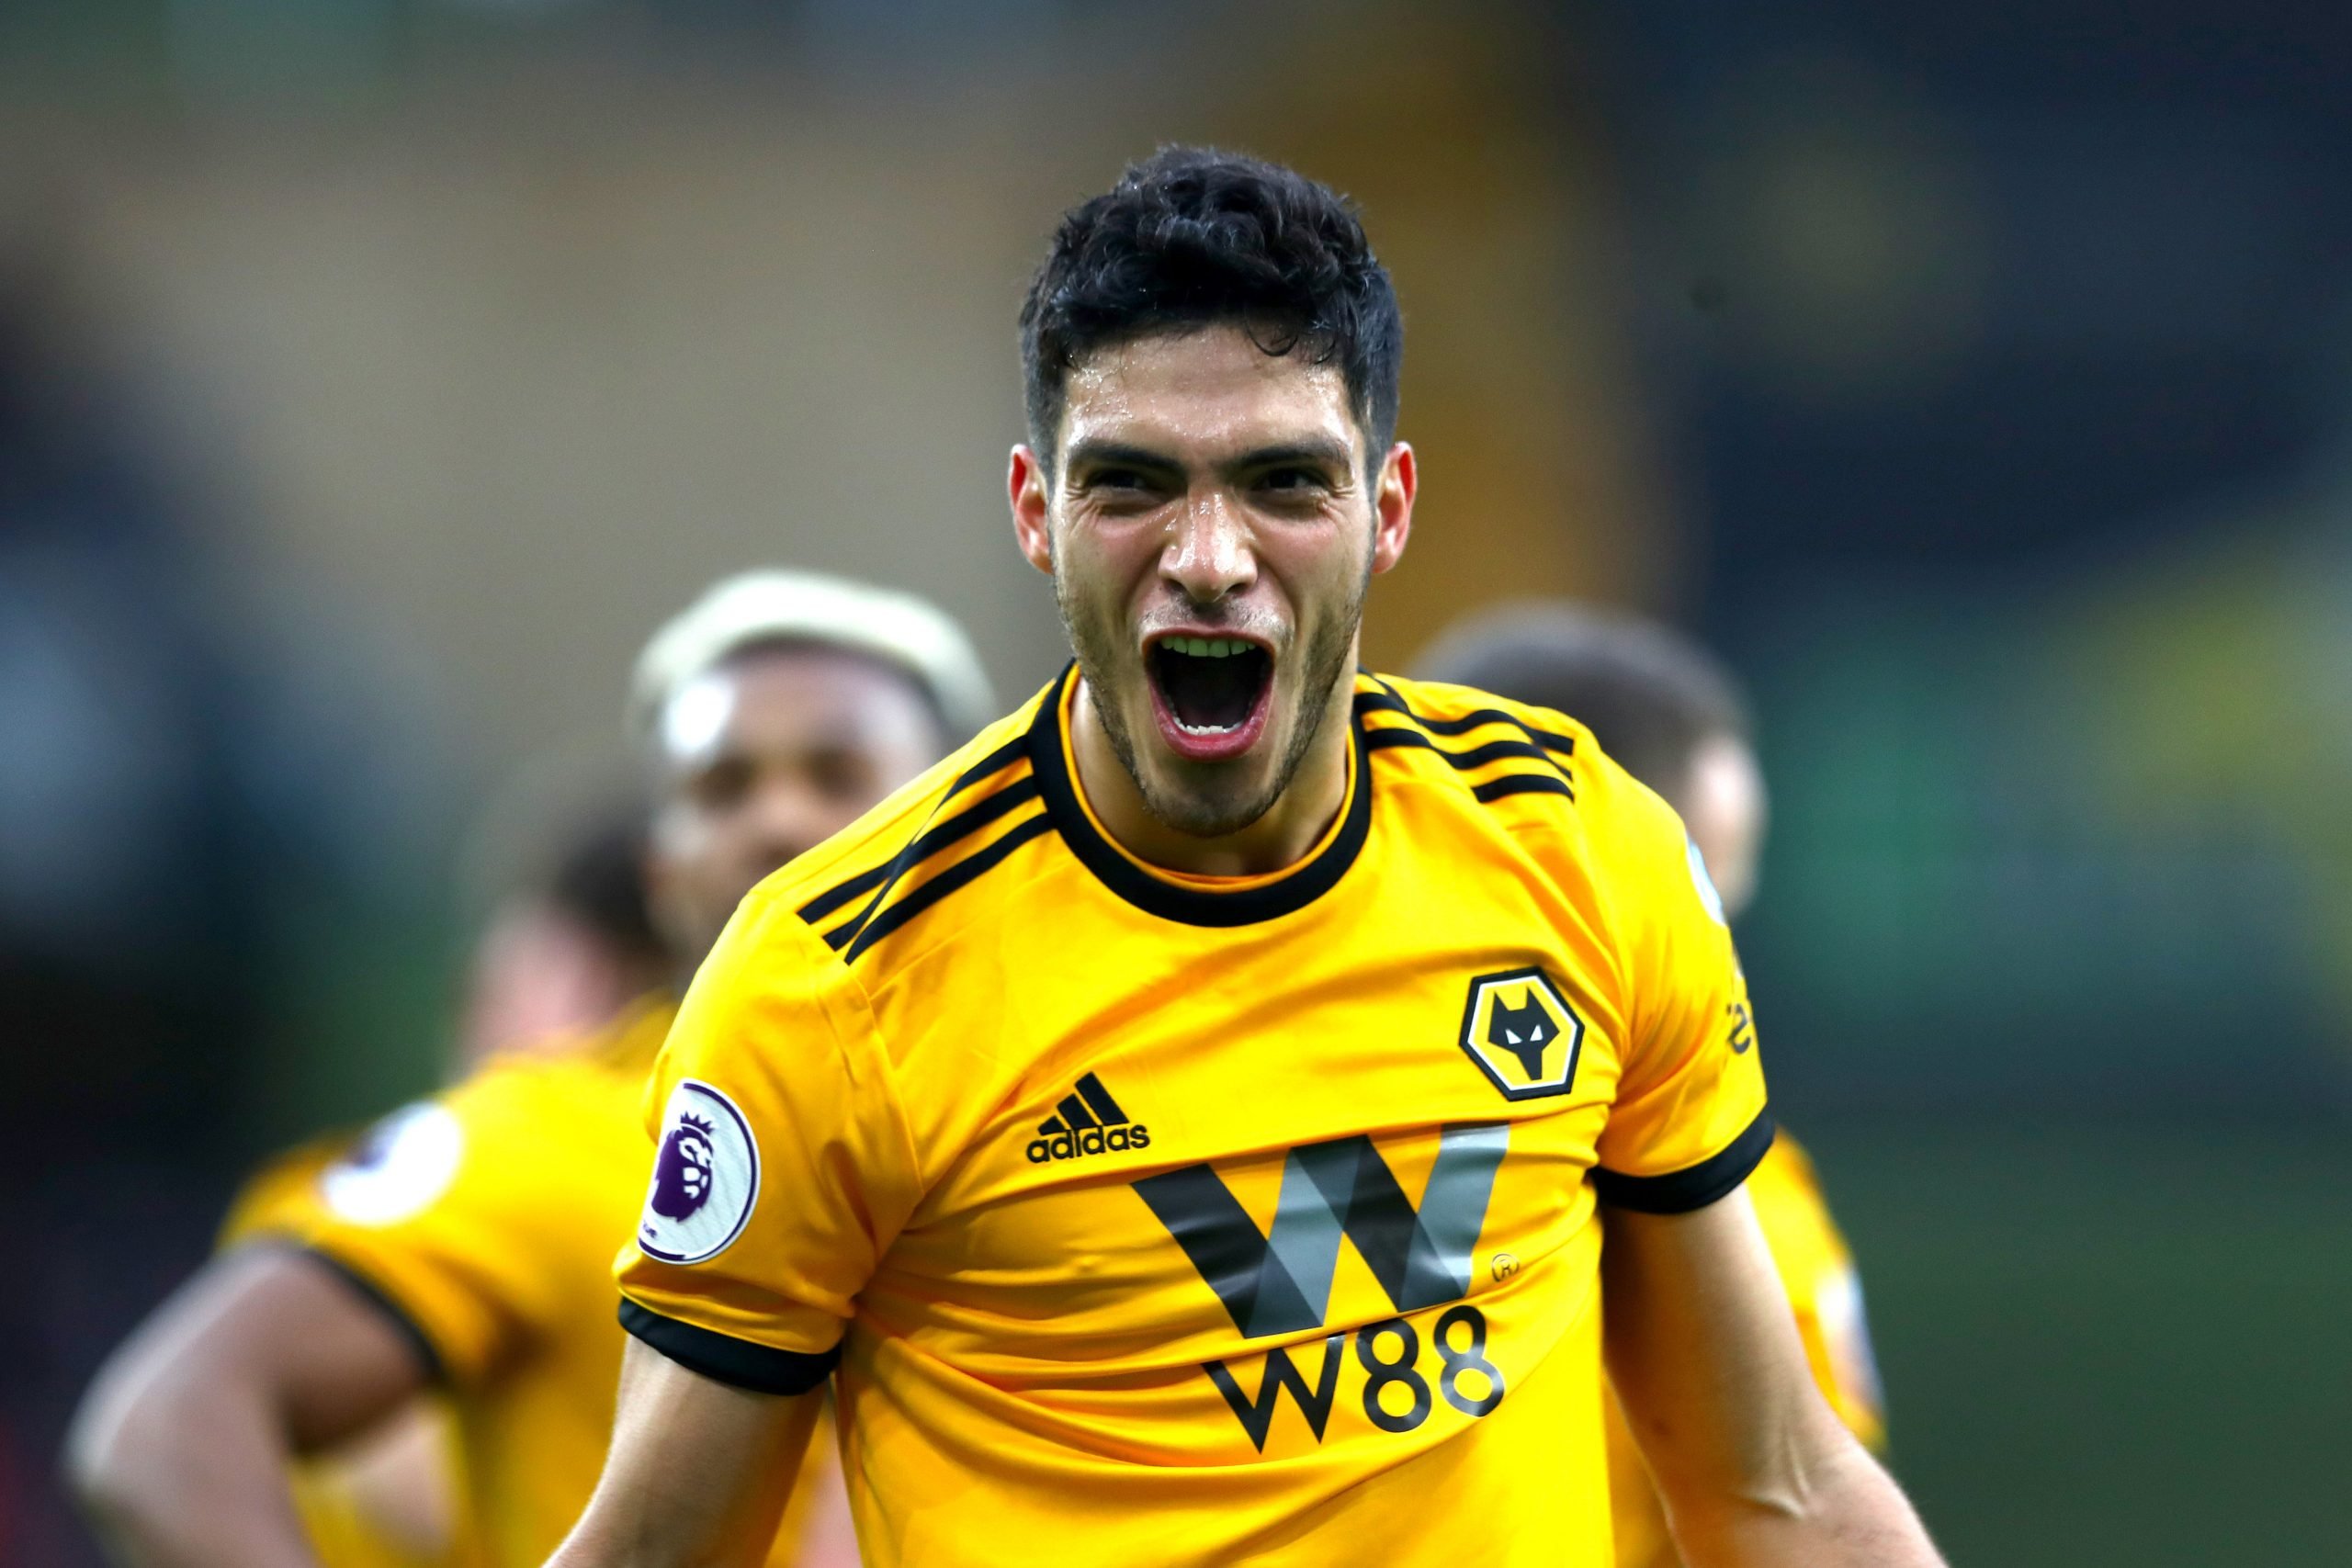 WOLVERHAMPTON, ENGLAND - MARCH 02: Raul Jimenez of Wolverhampton Wanderers celebrates after scoring his team's second goal during the Premier League match between Wolverhampton Wanderers and Cardiff City at Molineux on March 02, 2019 in Wolverhampton, United Kingdom. (Photo by Matthew Lewis/Getty Images)